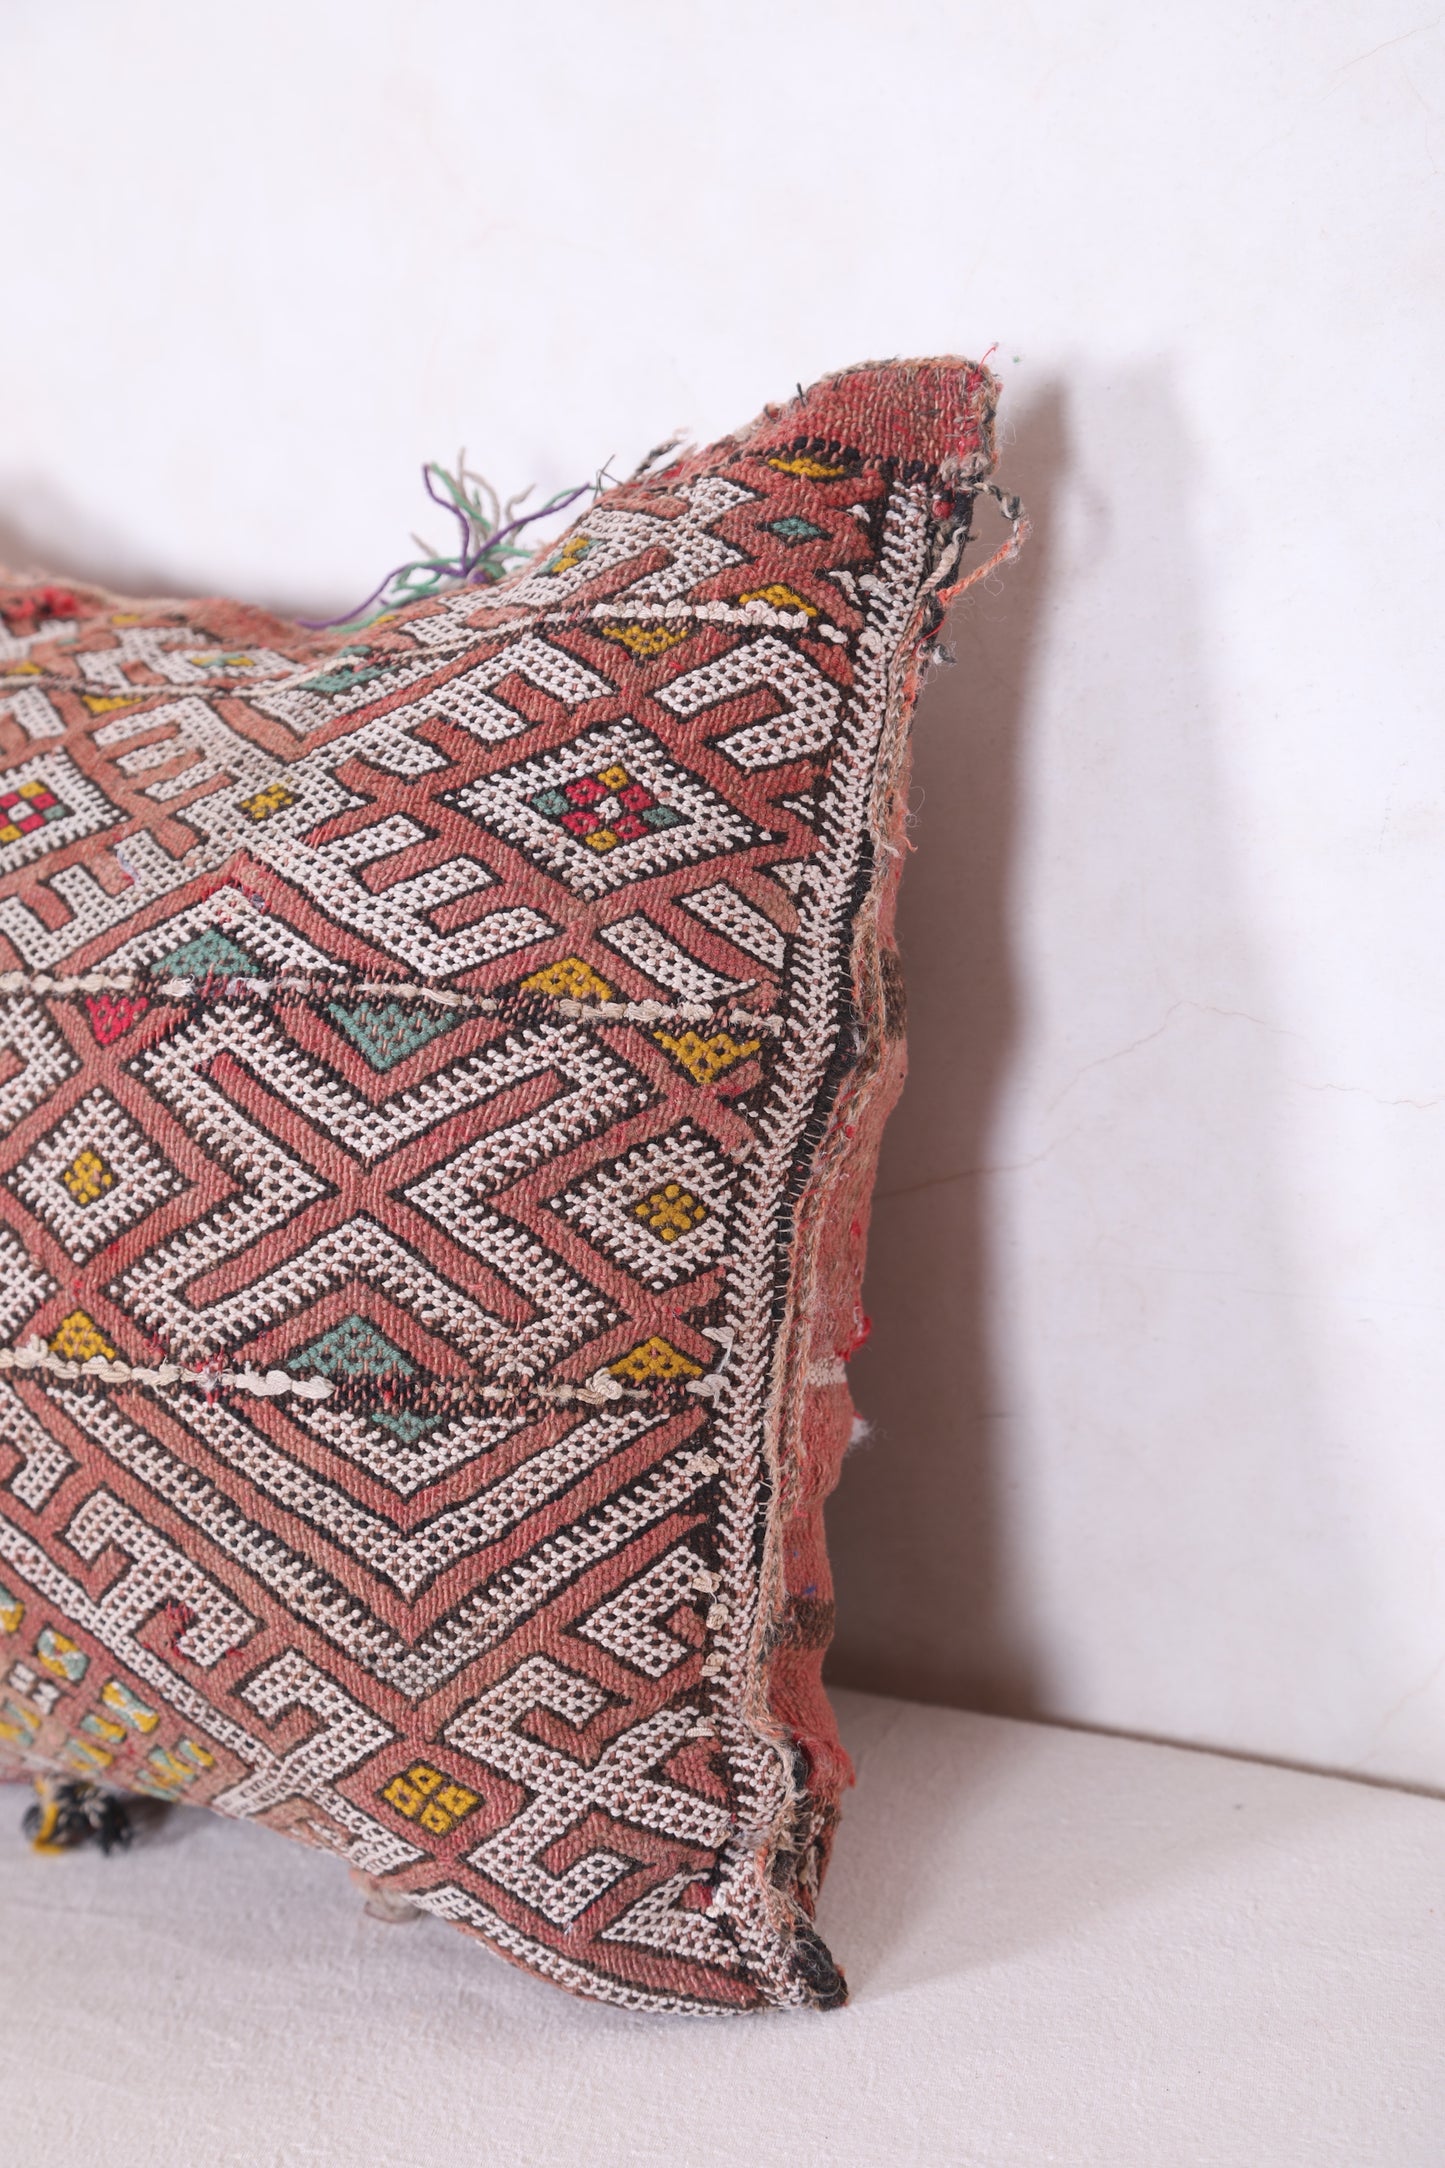 Vintage kilim pillow 14.5 INCHES X 17.3 INCHES